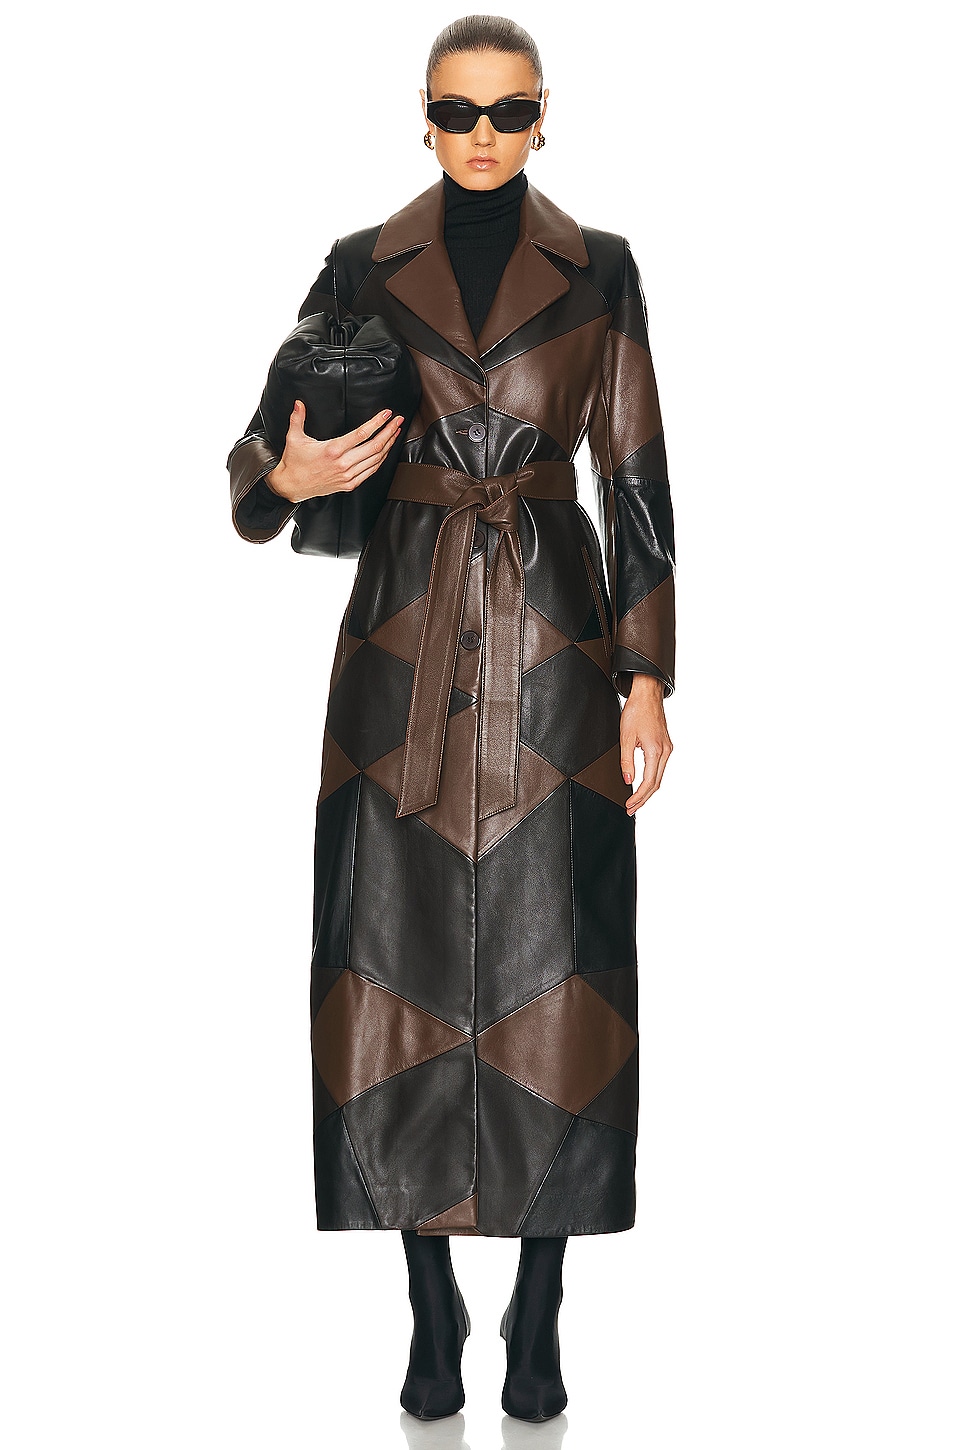 Image 1 of NOUR HAMMOUR for FWRD Sonja Patchwork Trench Coat in Black, Umber, & Walnut